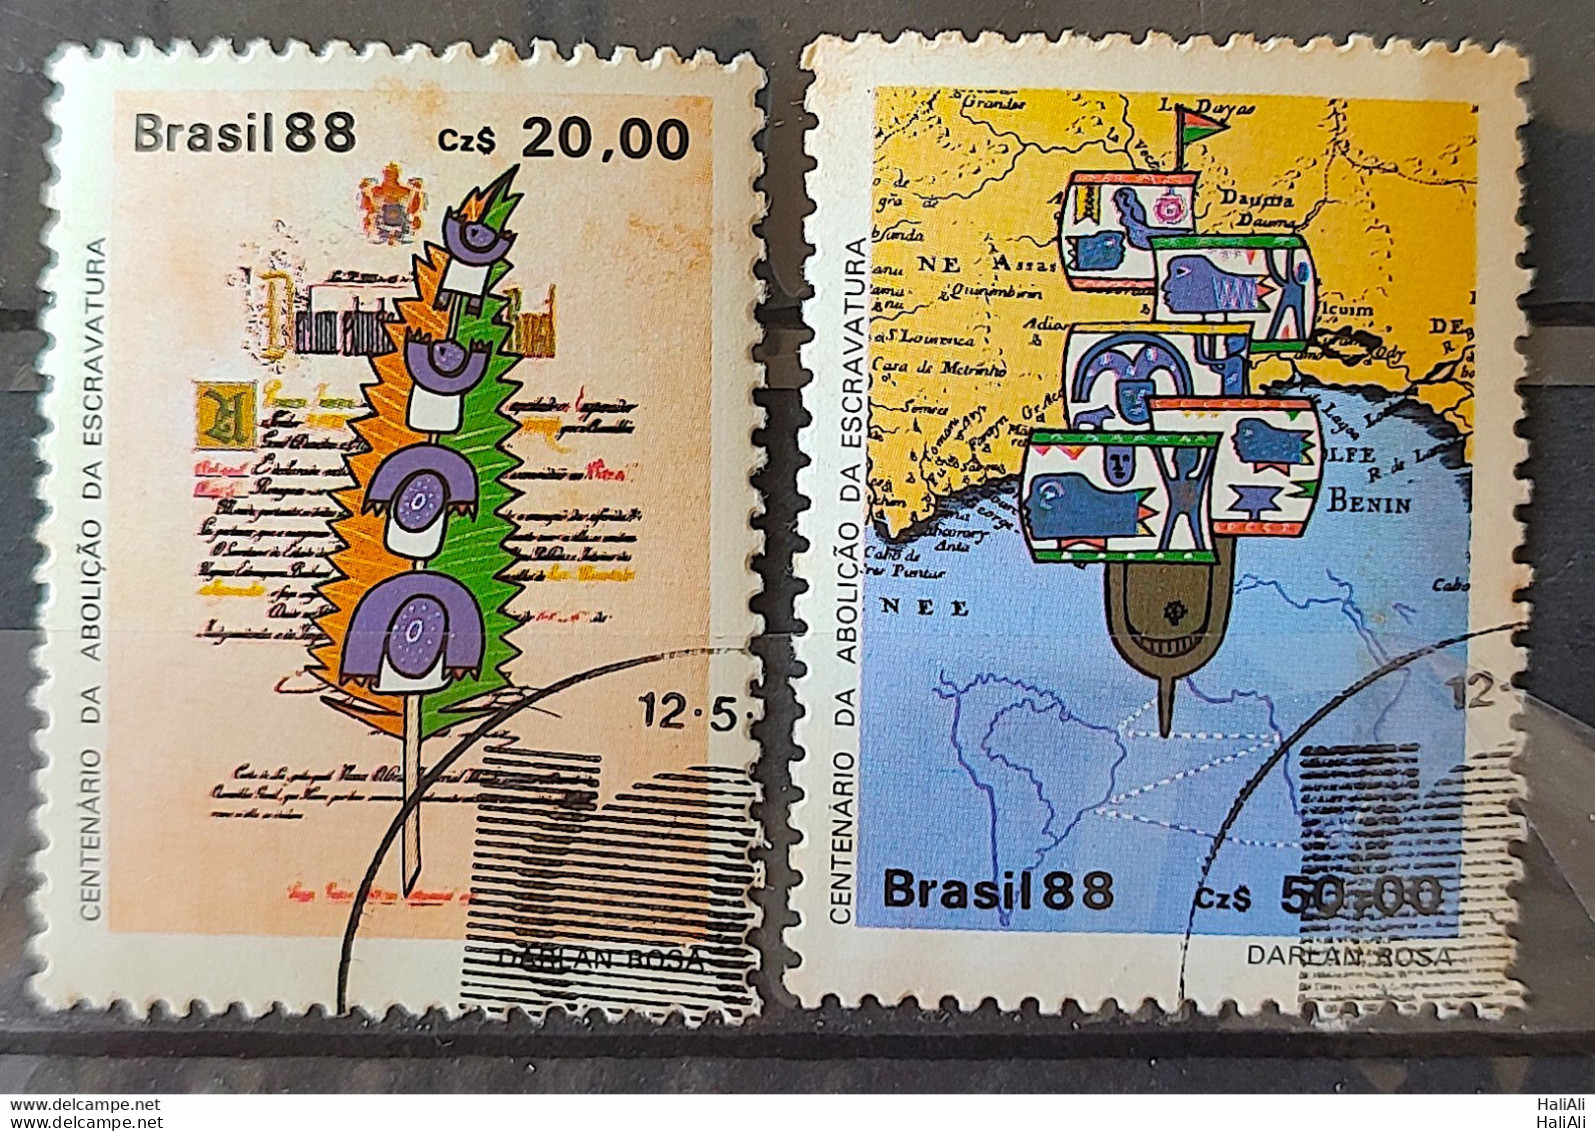 C 1583 Brazil Stamp 100 Years Abolition Of Slavery Law Aurea Ship Slave 1988 Complete Series Circulated 5 - Gebruikt